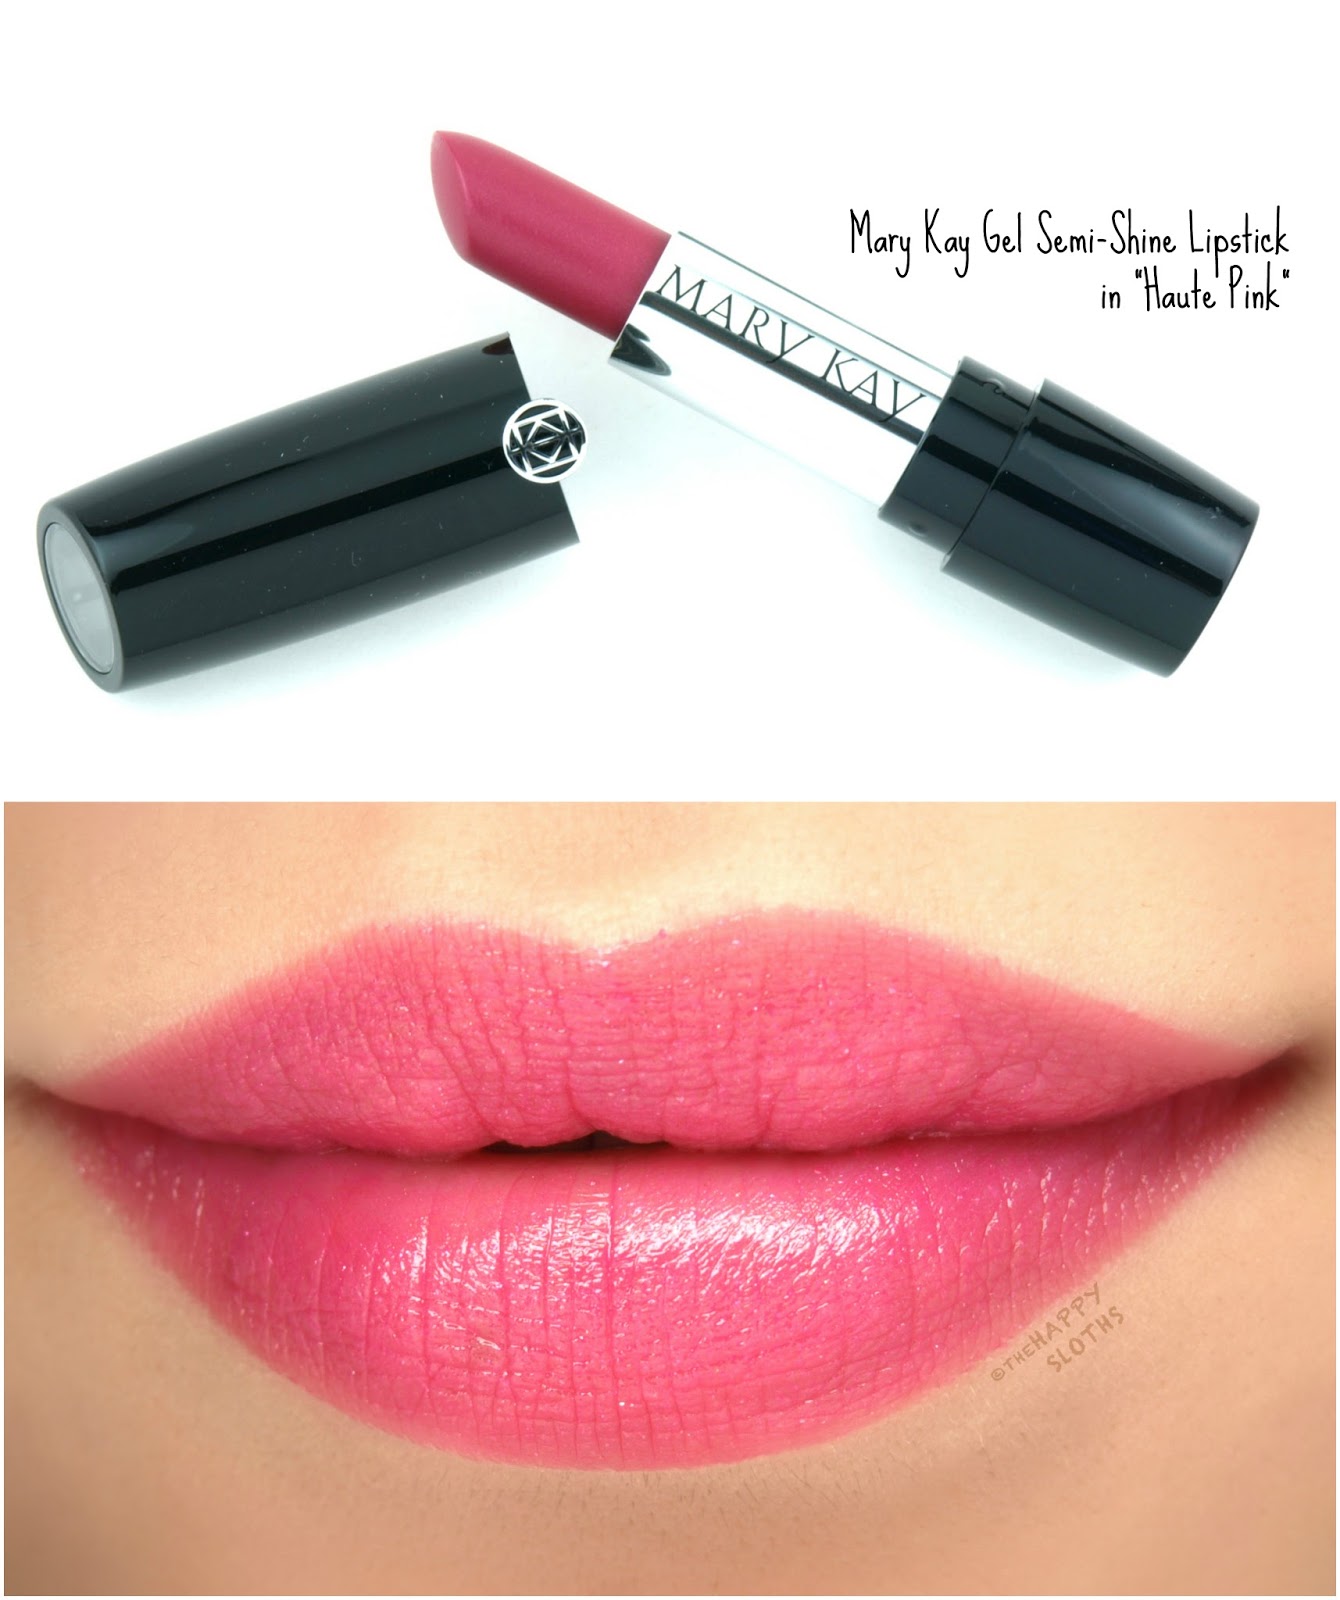 Mary Kay Gel Semi-Shine Lipstick in "Apple Berry": Review and Swatches